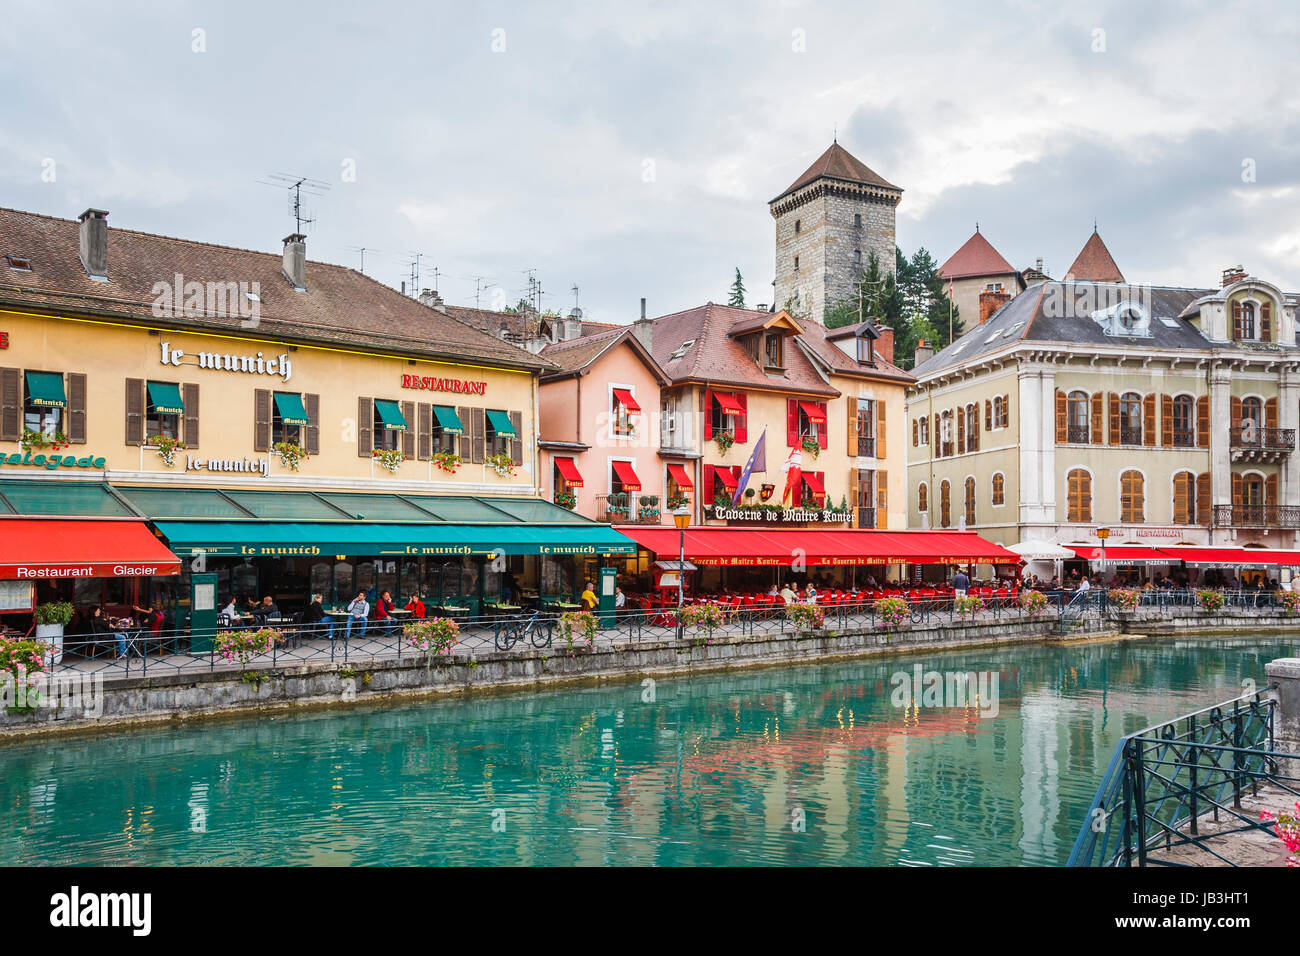 Restaurants and cafes with colourful red and green awnings in historic buildings along the bank of the Thiou river in the old town of Annecy, France Stock Photo